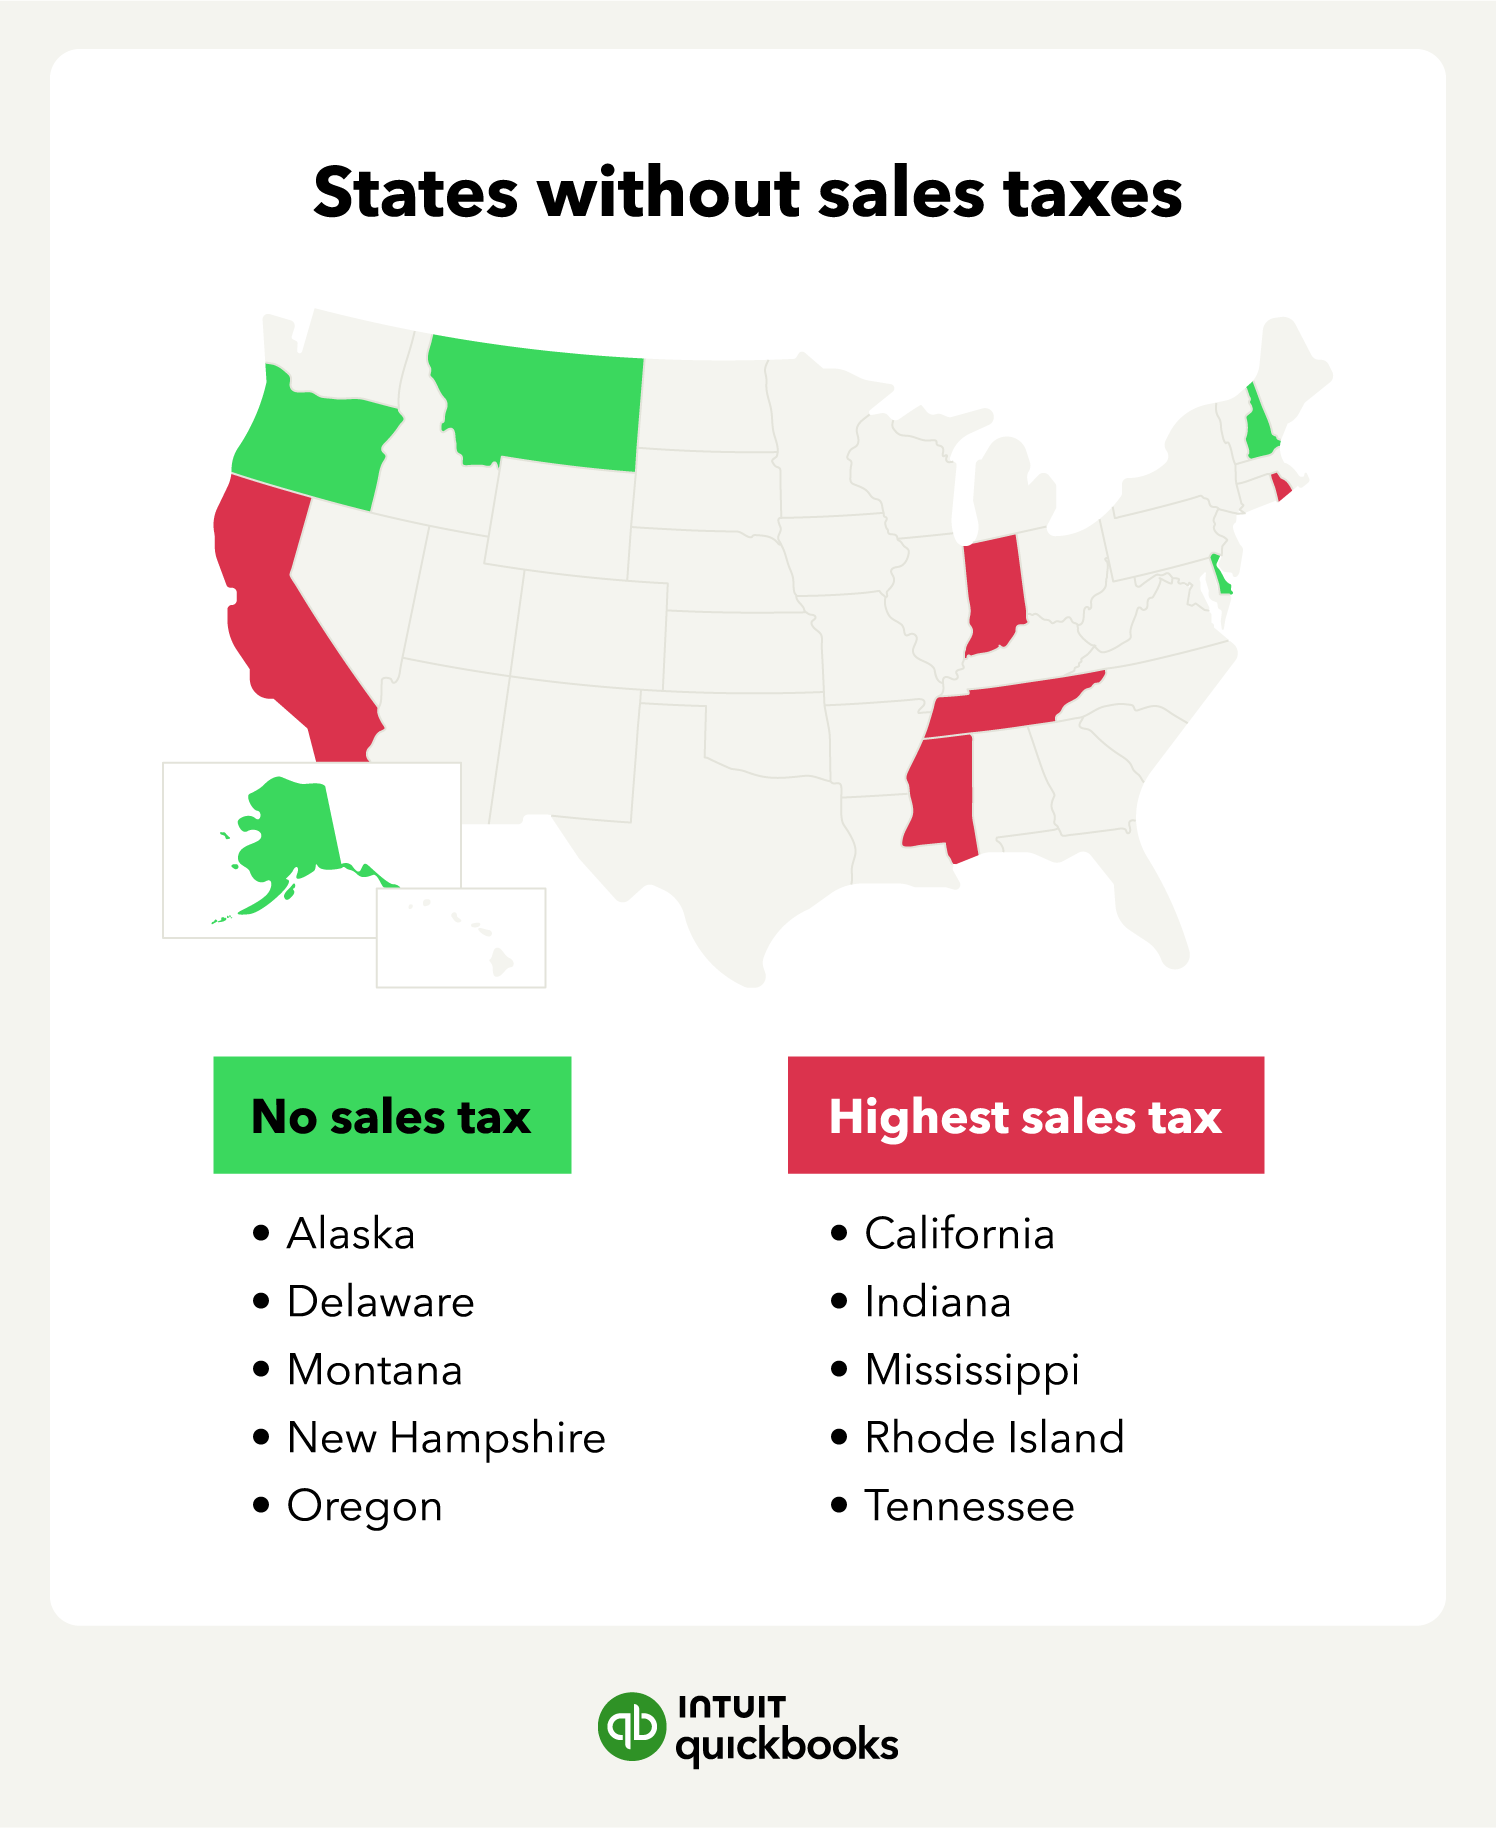 An illustration of the states without sales taxes.